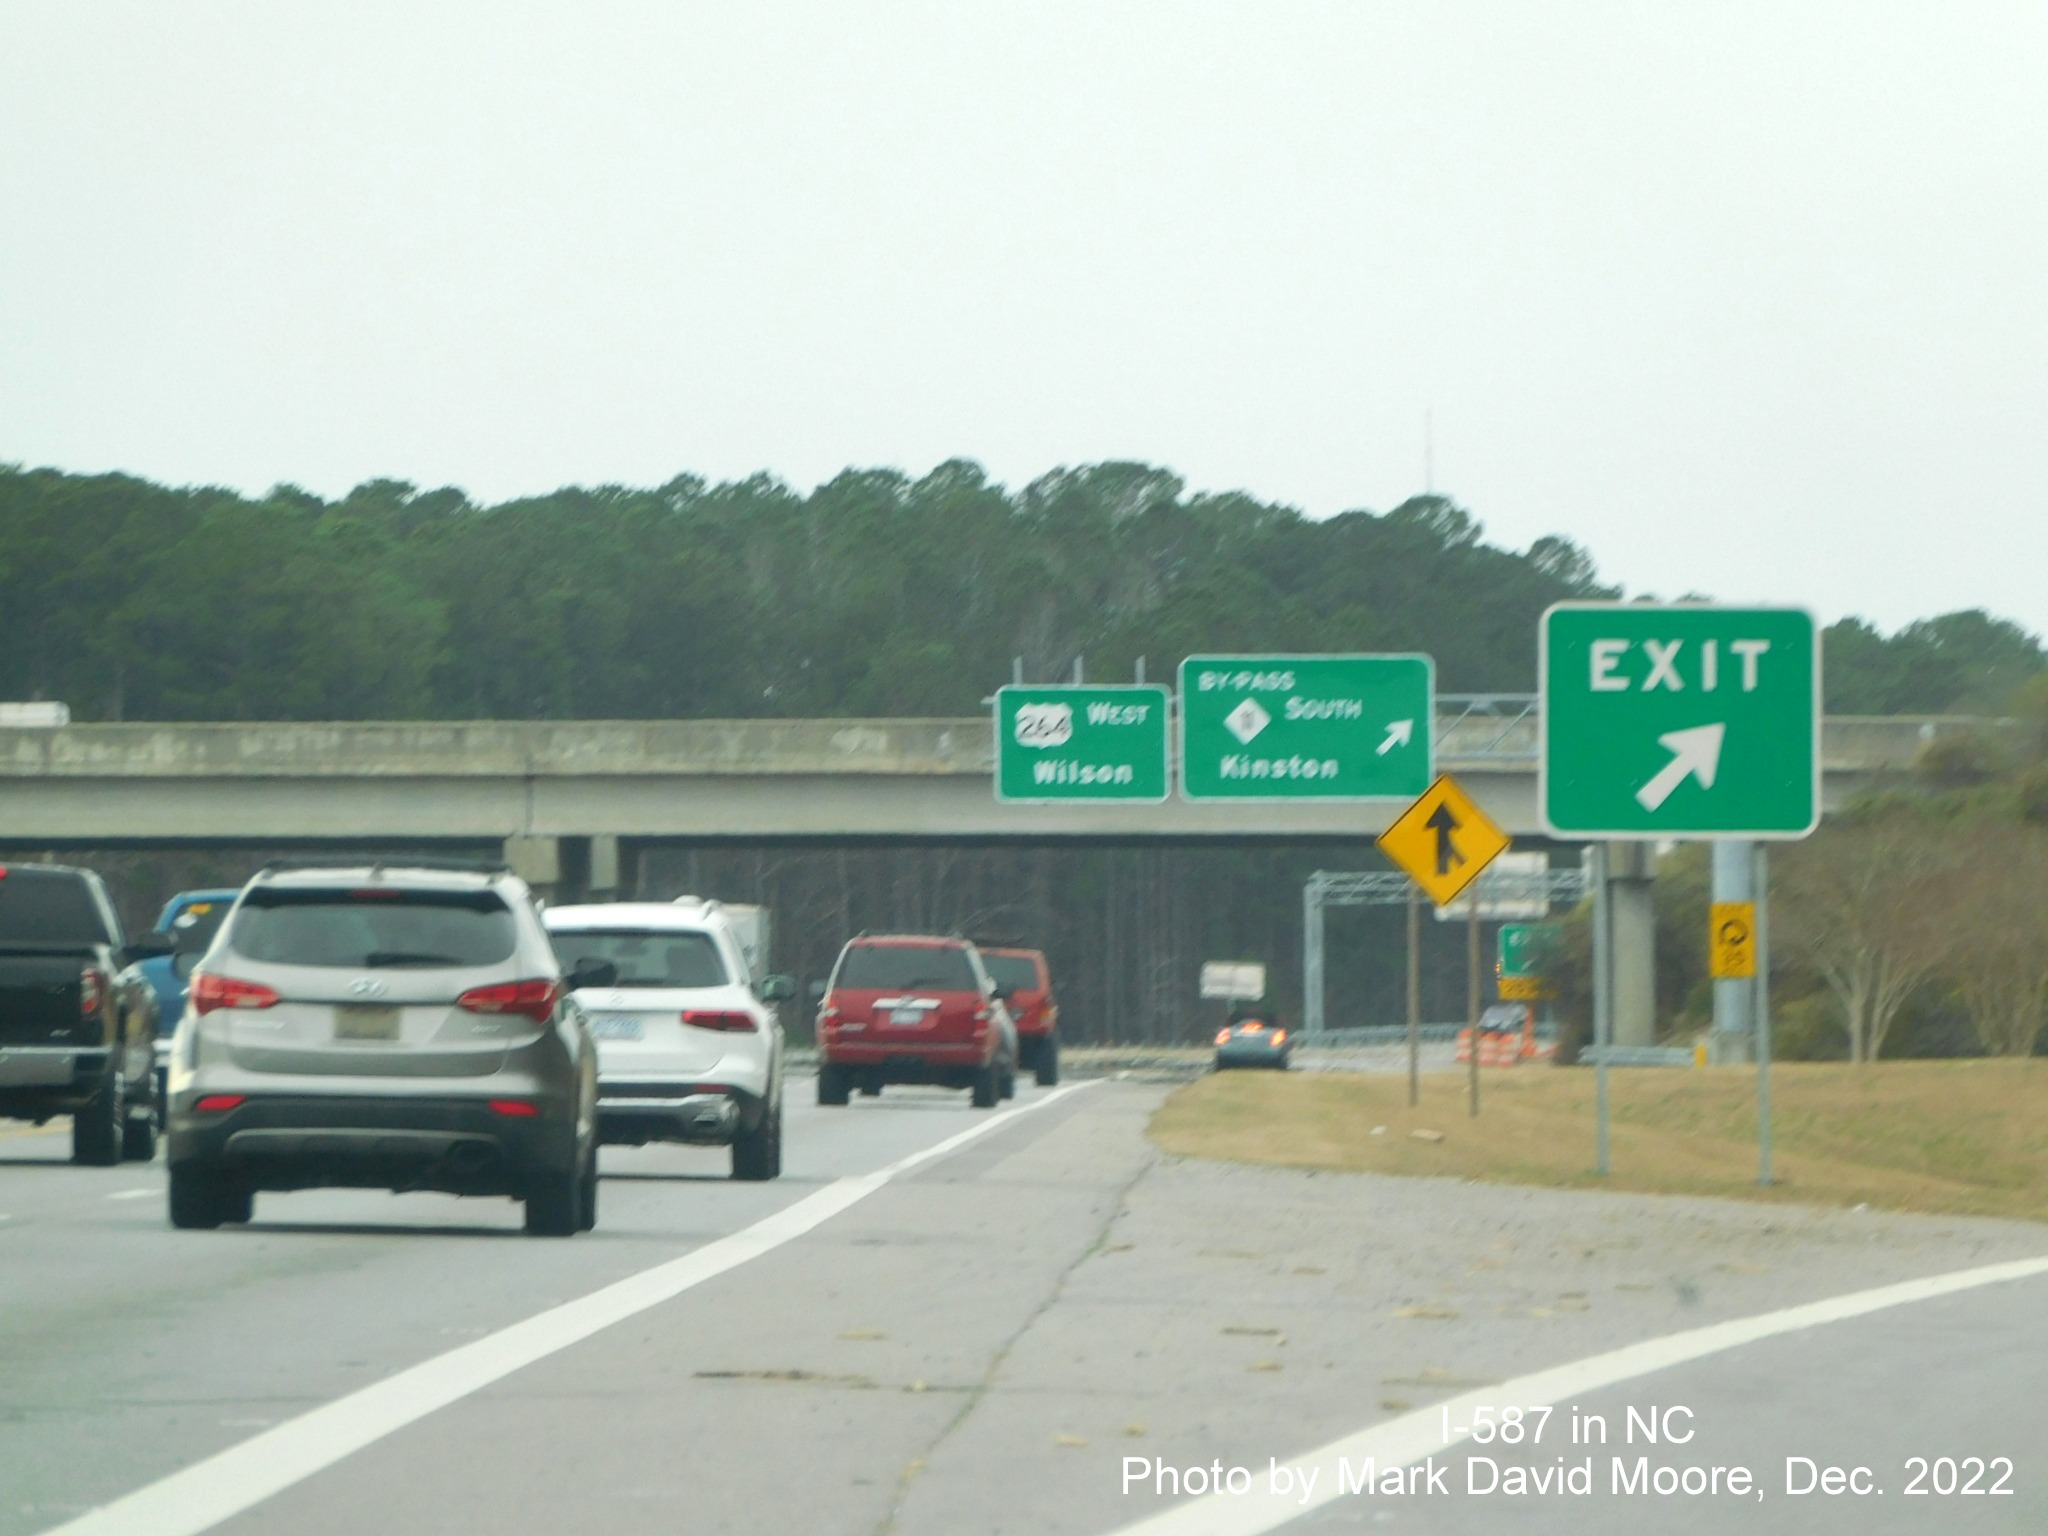 Image of overhead and gore sign for US 264 West/NC 11 Bypass North in Greenville at beginning of I-587 West, not on signs, photo by Mark David Moore, December 2022